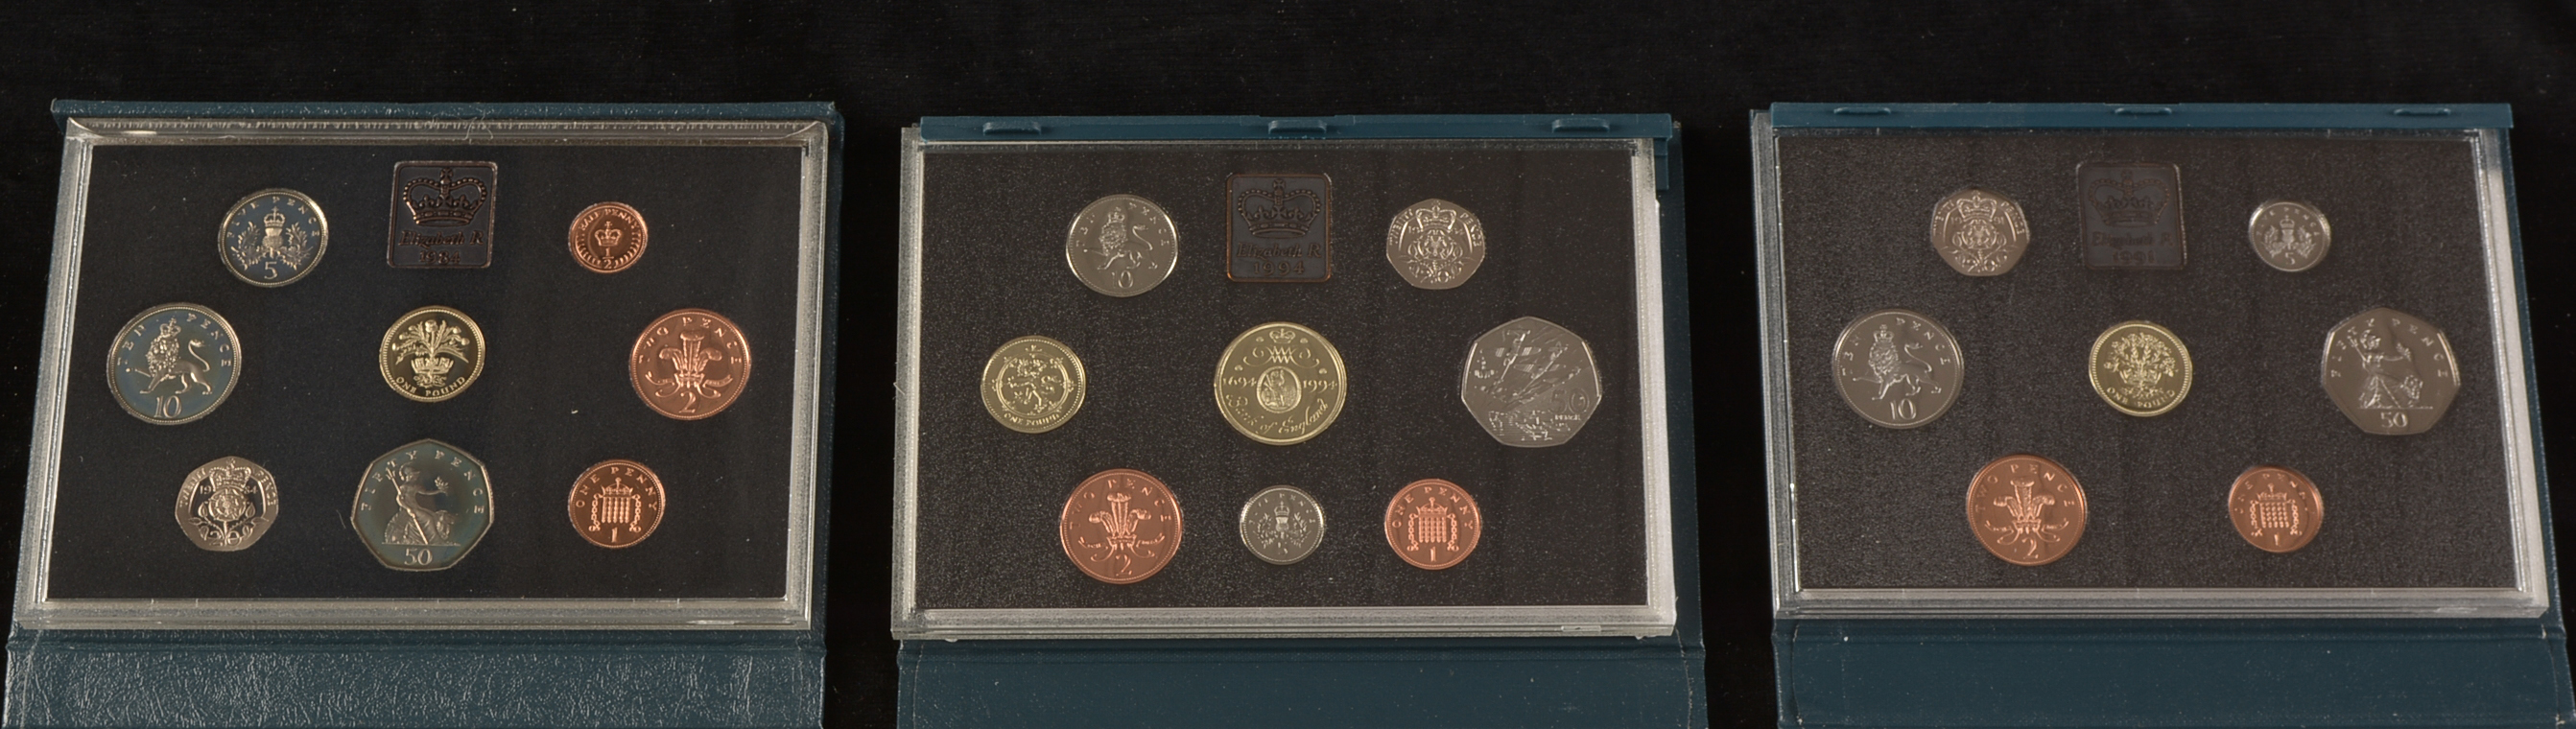 GB Royal Mint proof sets and other coins - Image 7 of 7